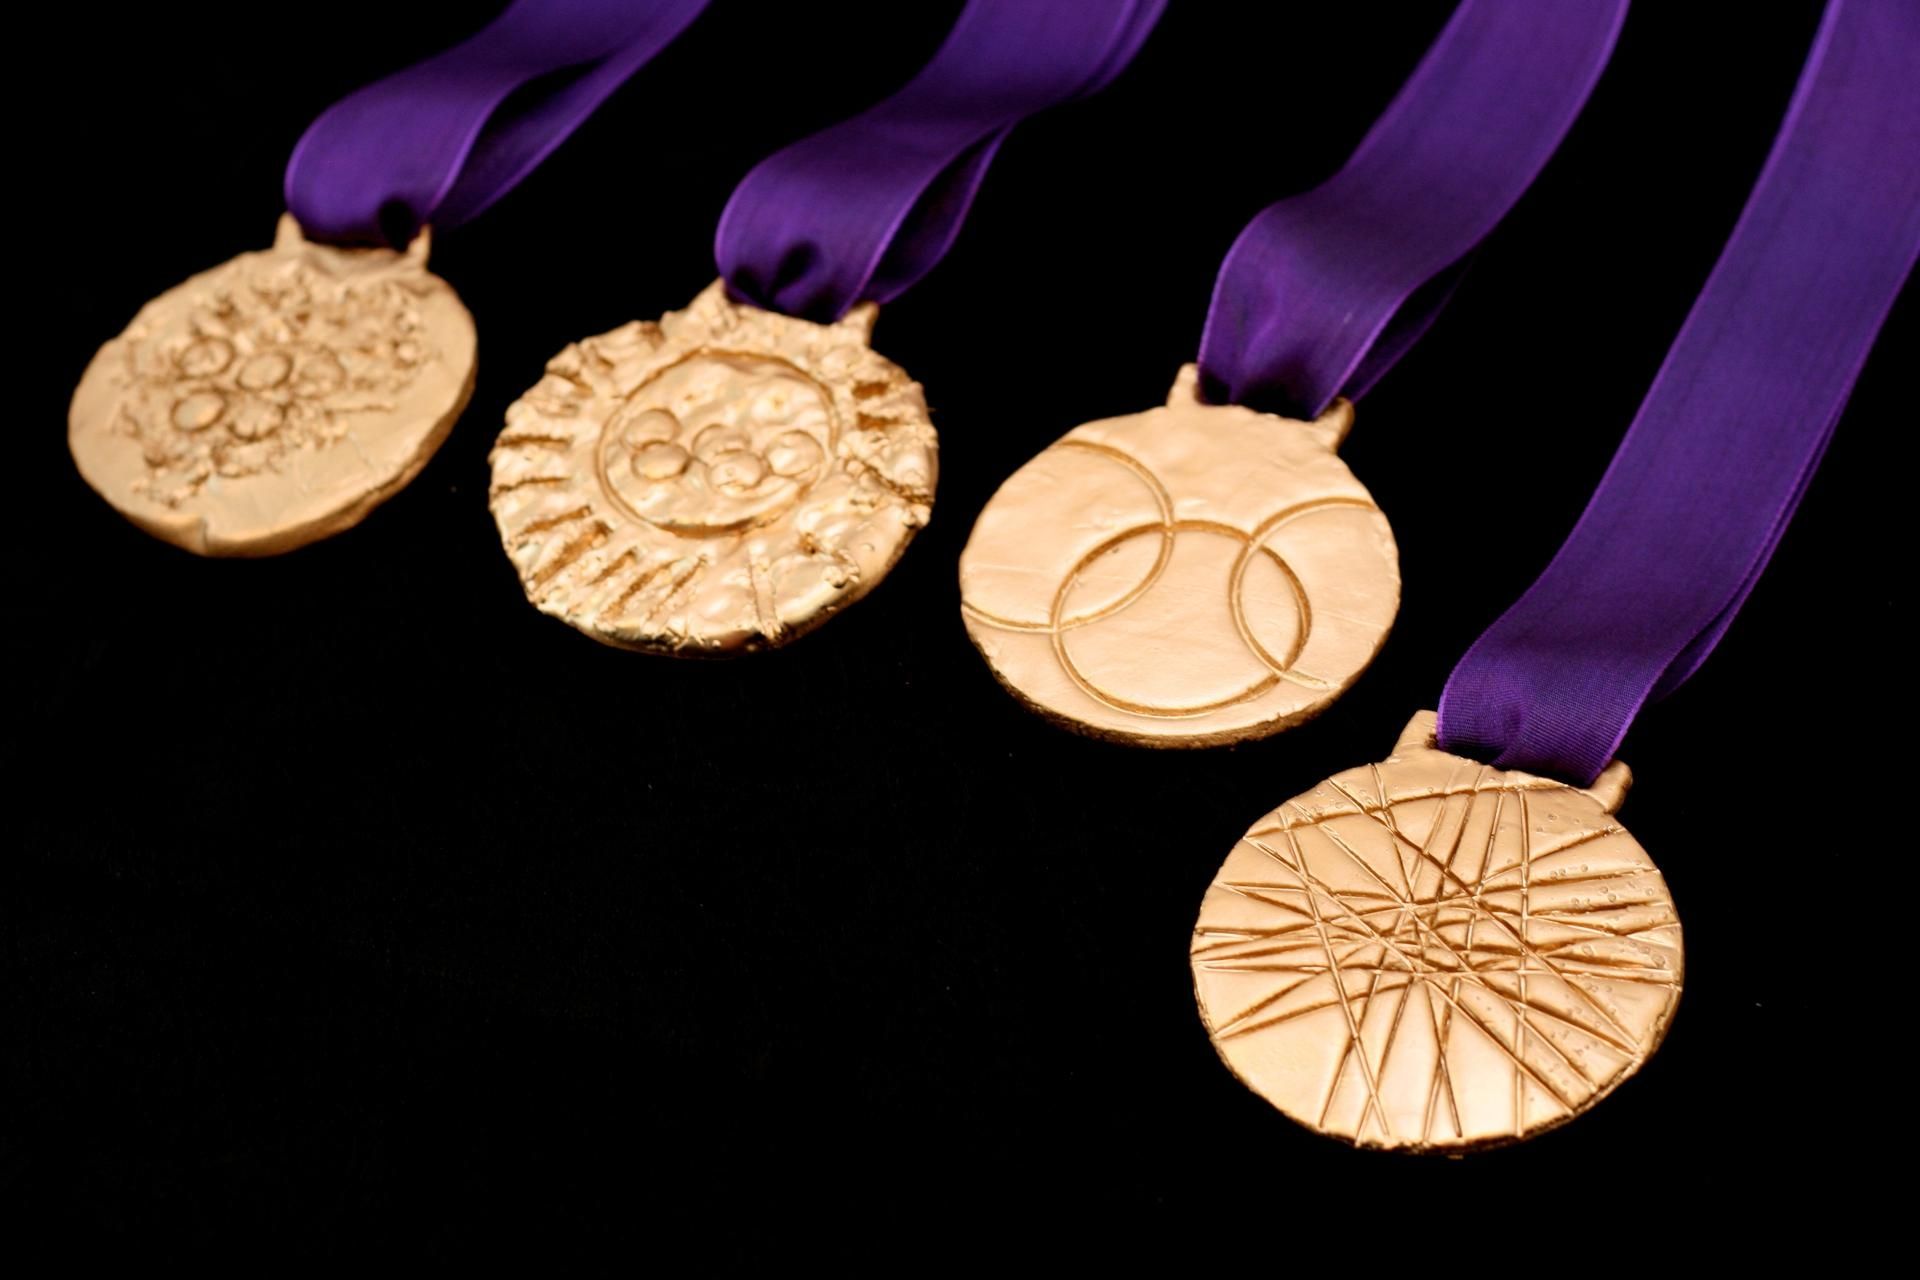 medal dream meaning, dream about medal, medal dream interpretation, seeing in a dream medal